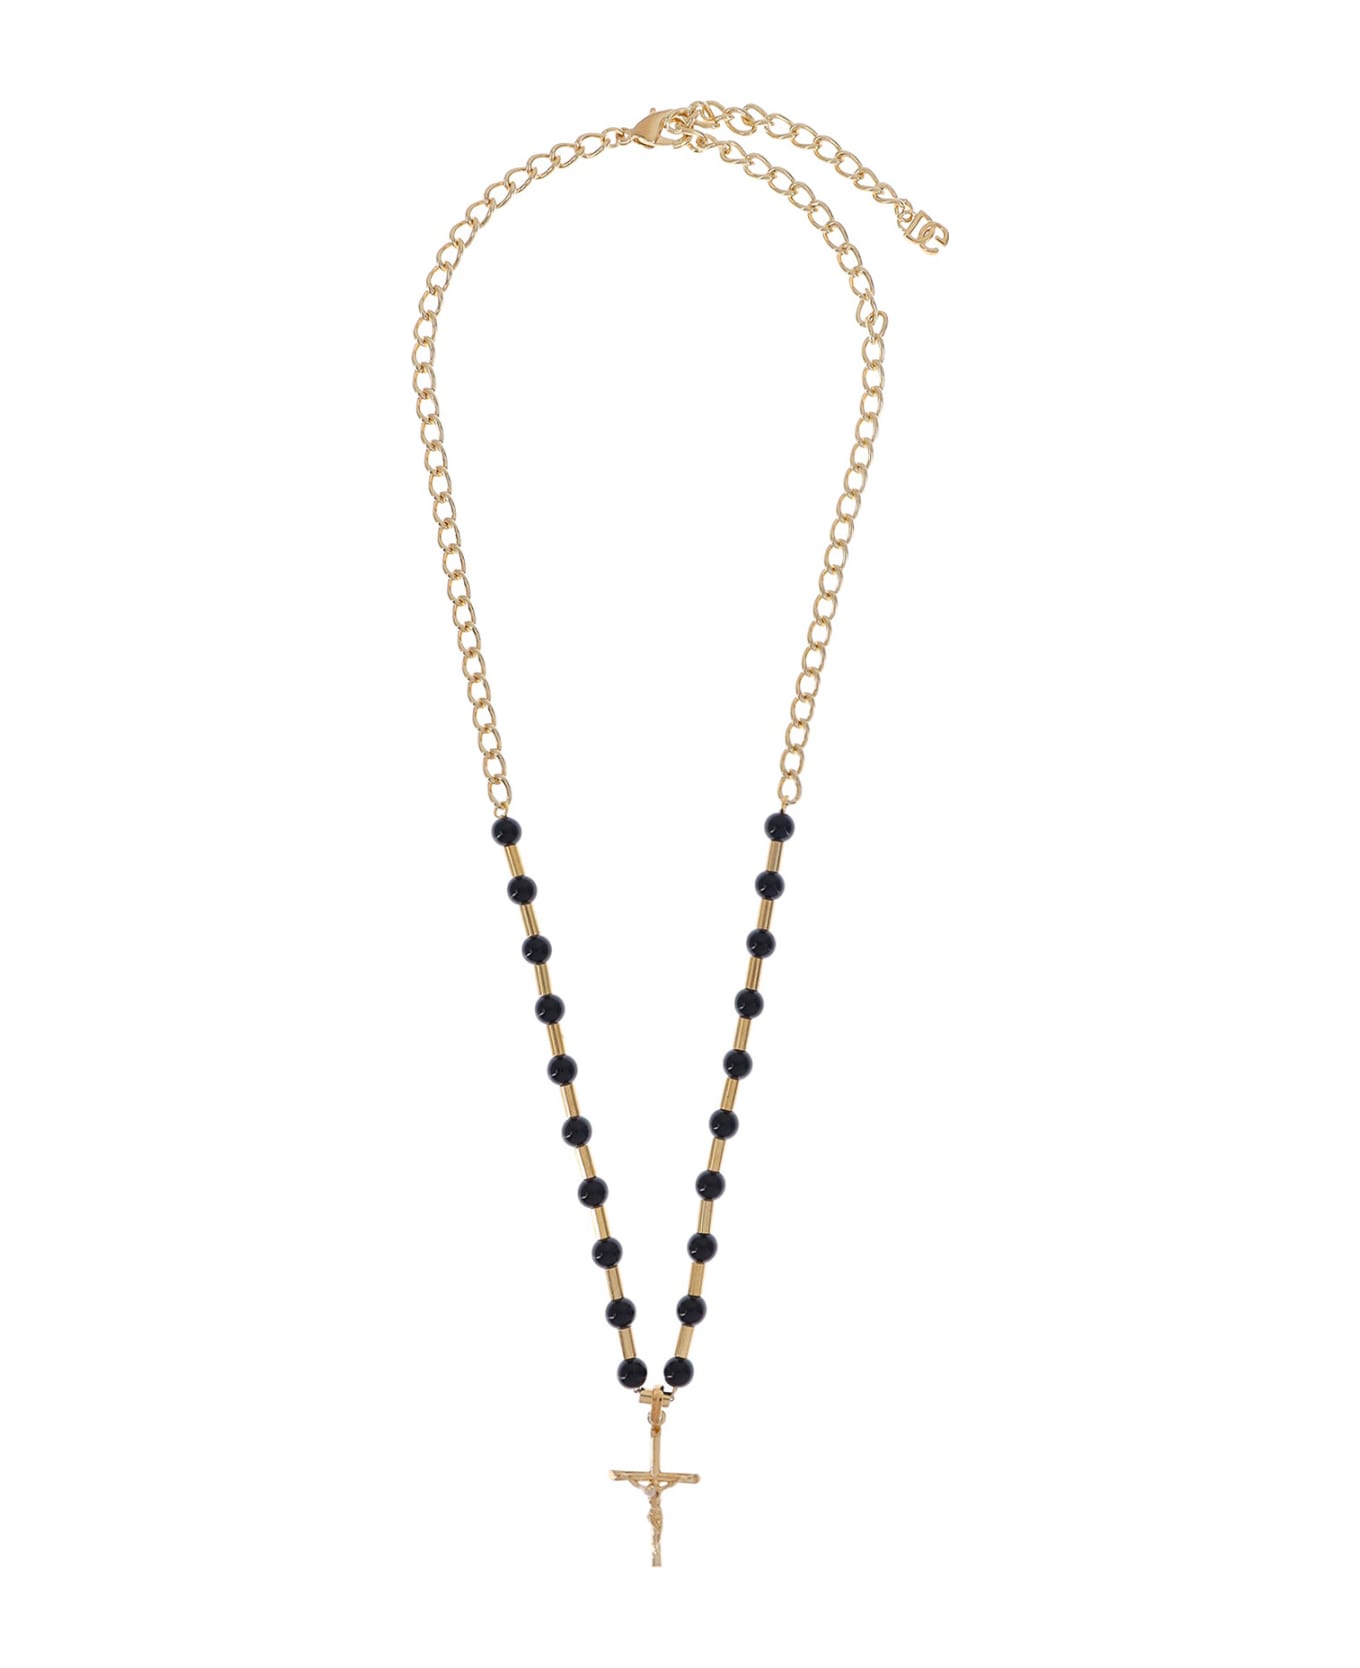 Dolce & Gabbana Necklace - Gold ネックレス